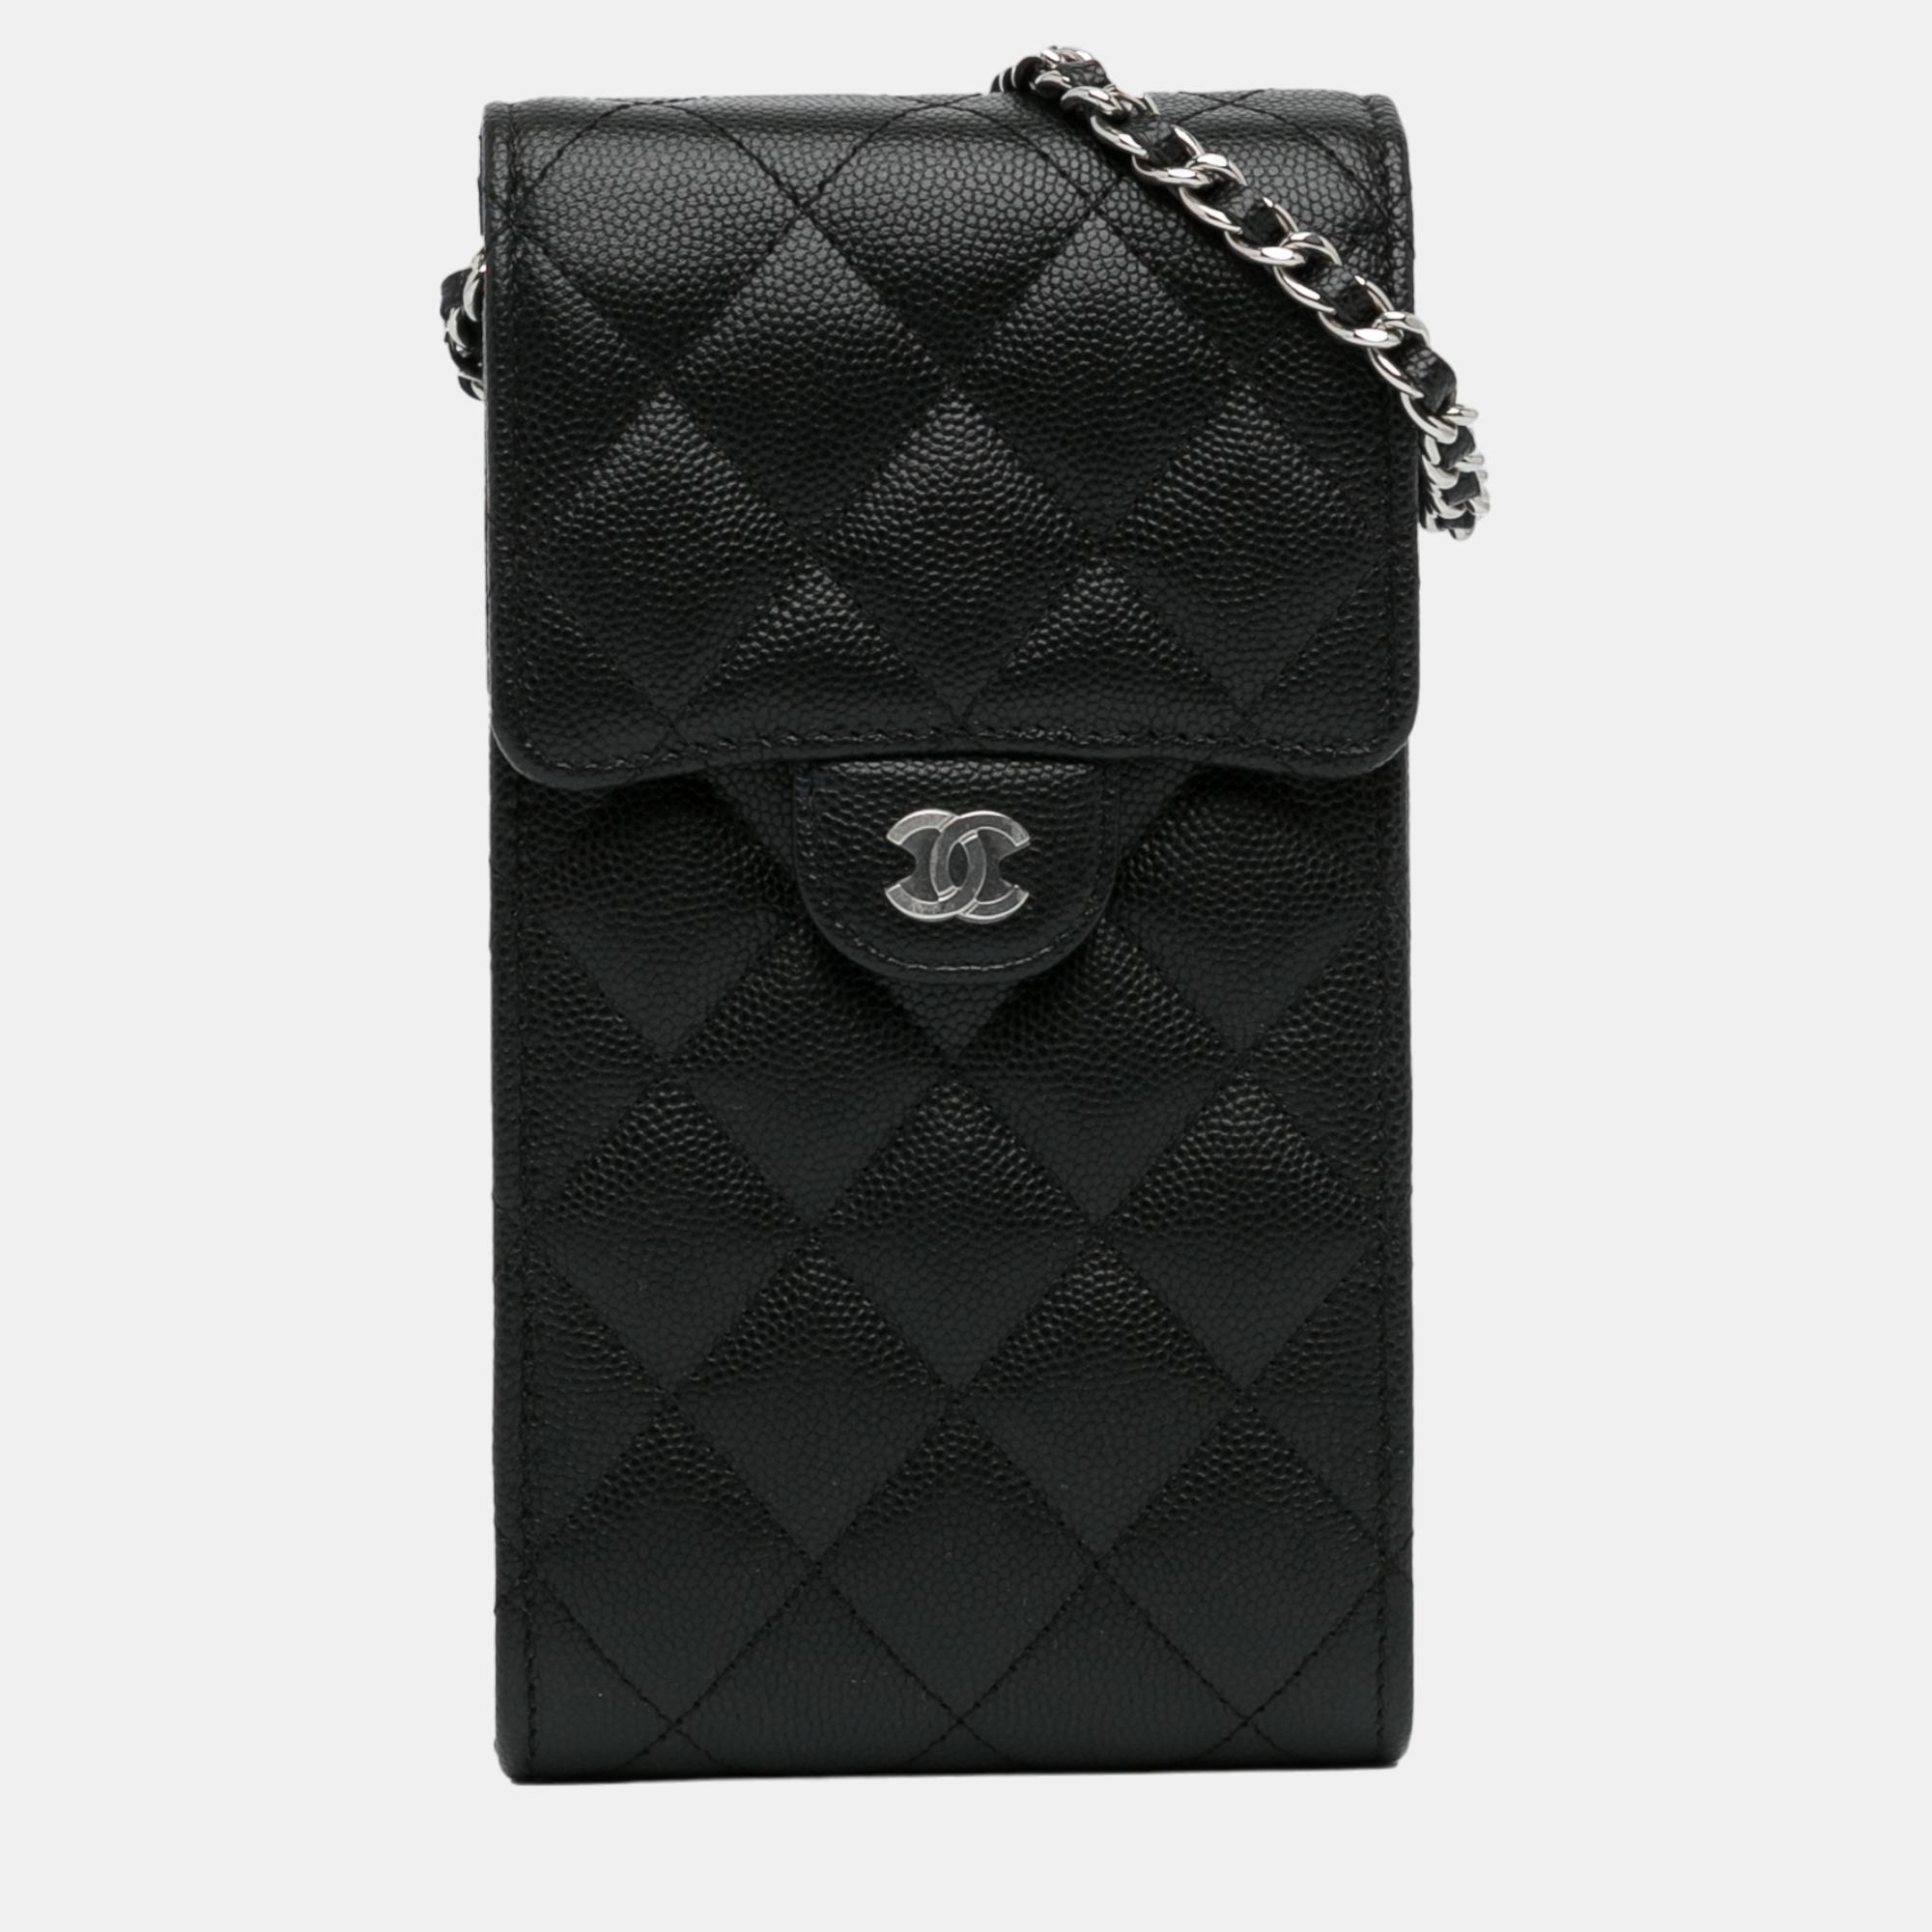 Chanel black quilted caviar phone holder with chain